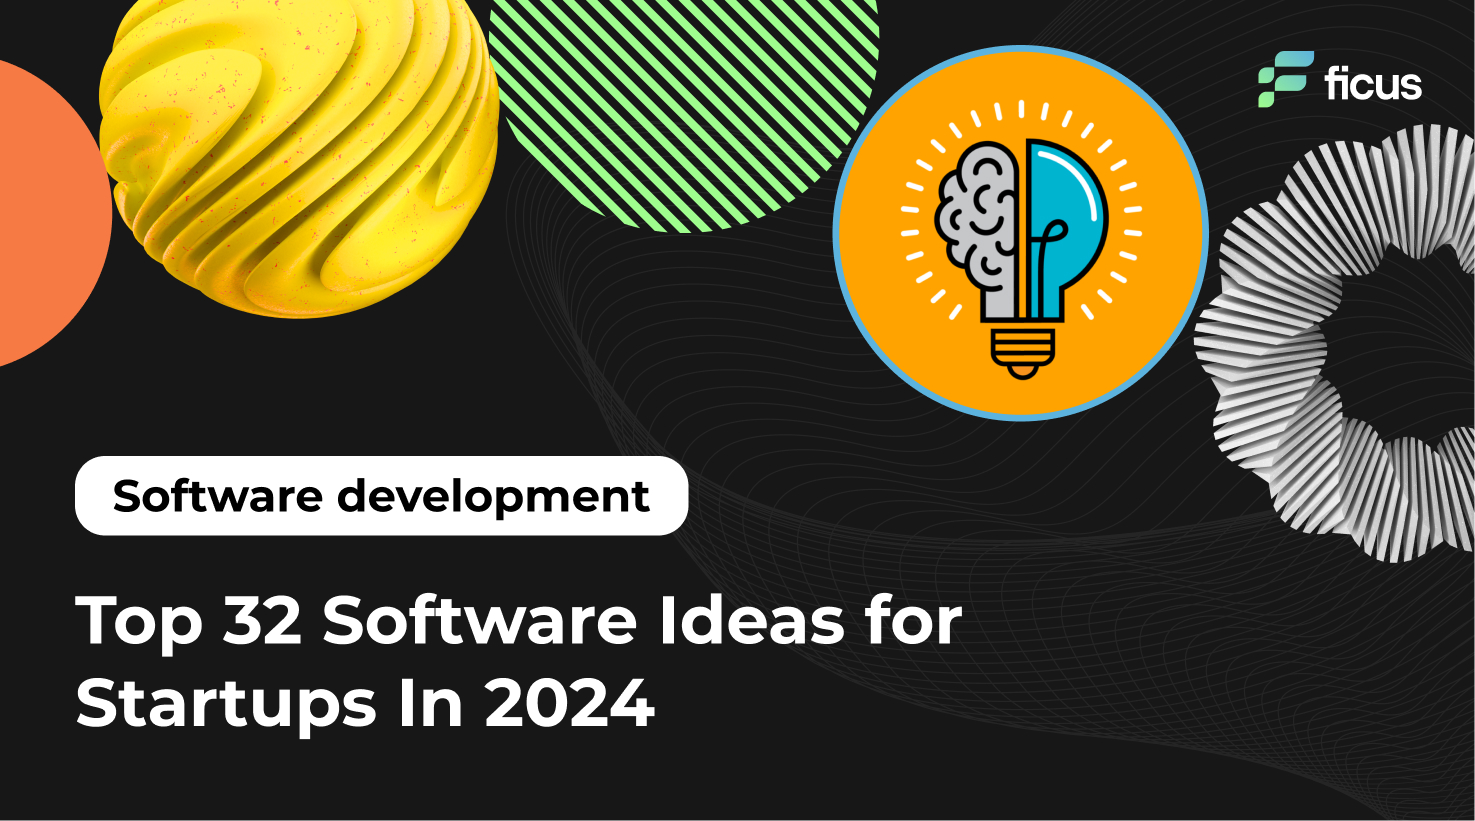 op-32-Software-Ideas-for-Startups-In-2024